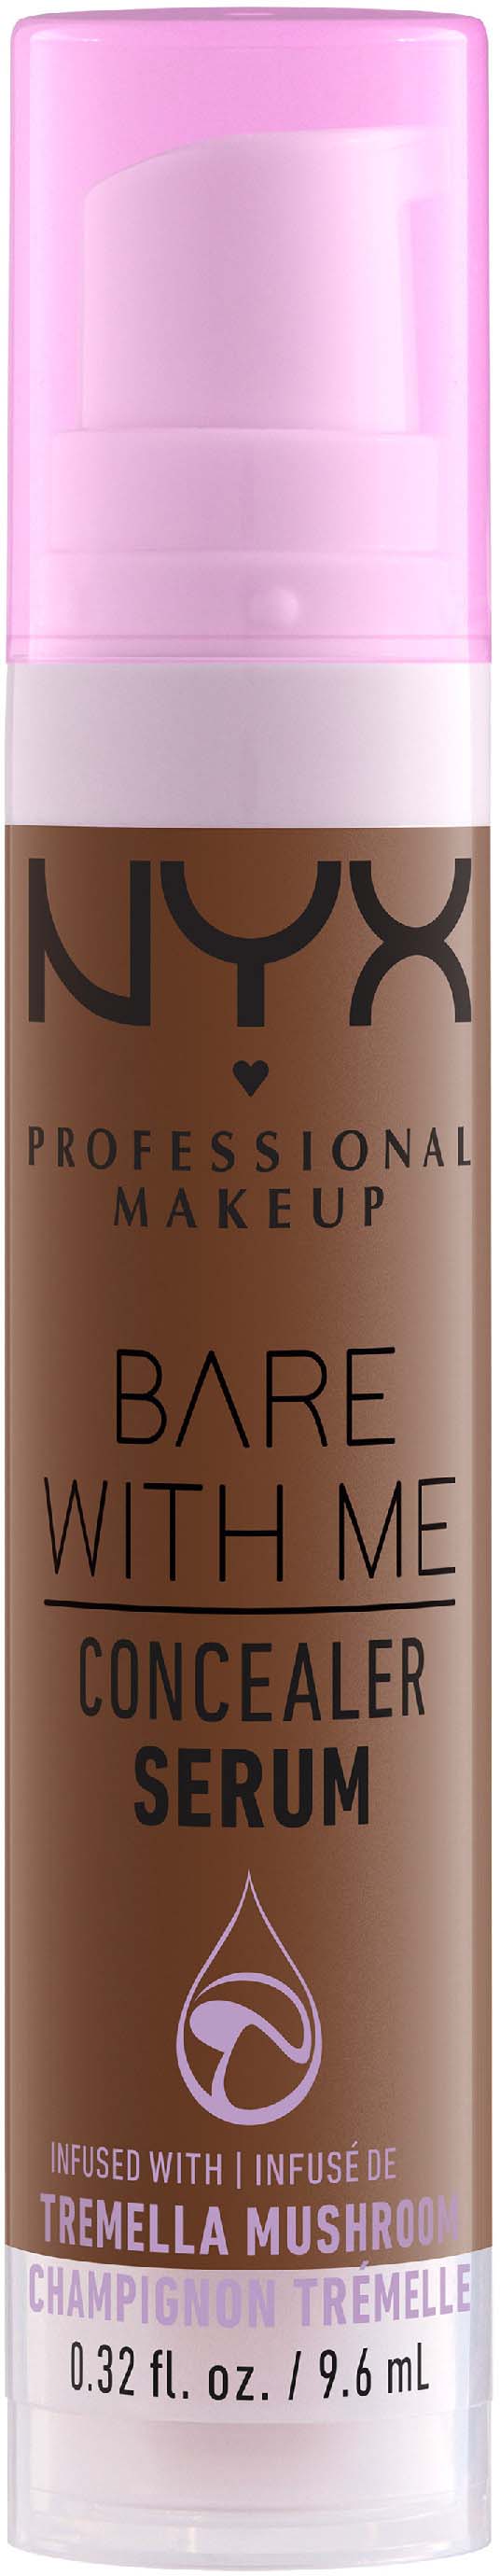 Concealer Rich Bare With NYX MAKEUP Serum Me PROFESSIONAL